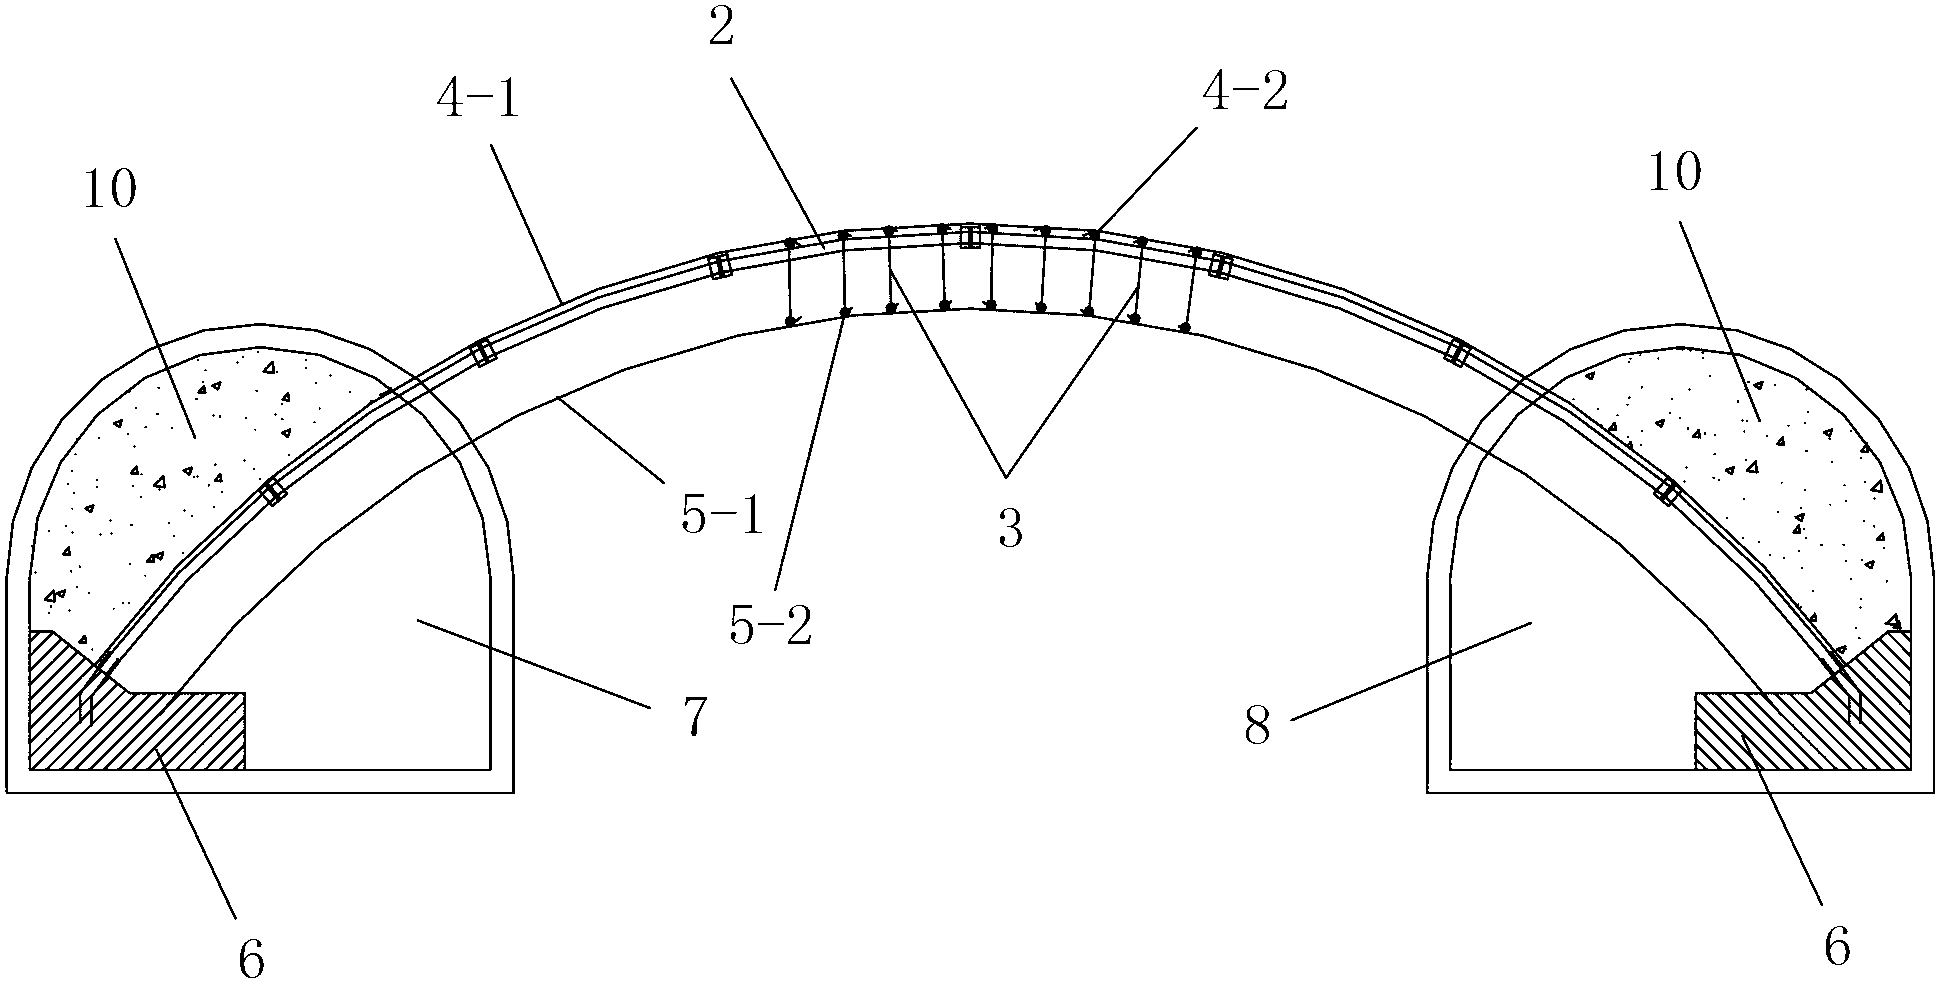 Large-span tunnel arch secondary lining steel bar binding construction method based on skeleton beams